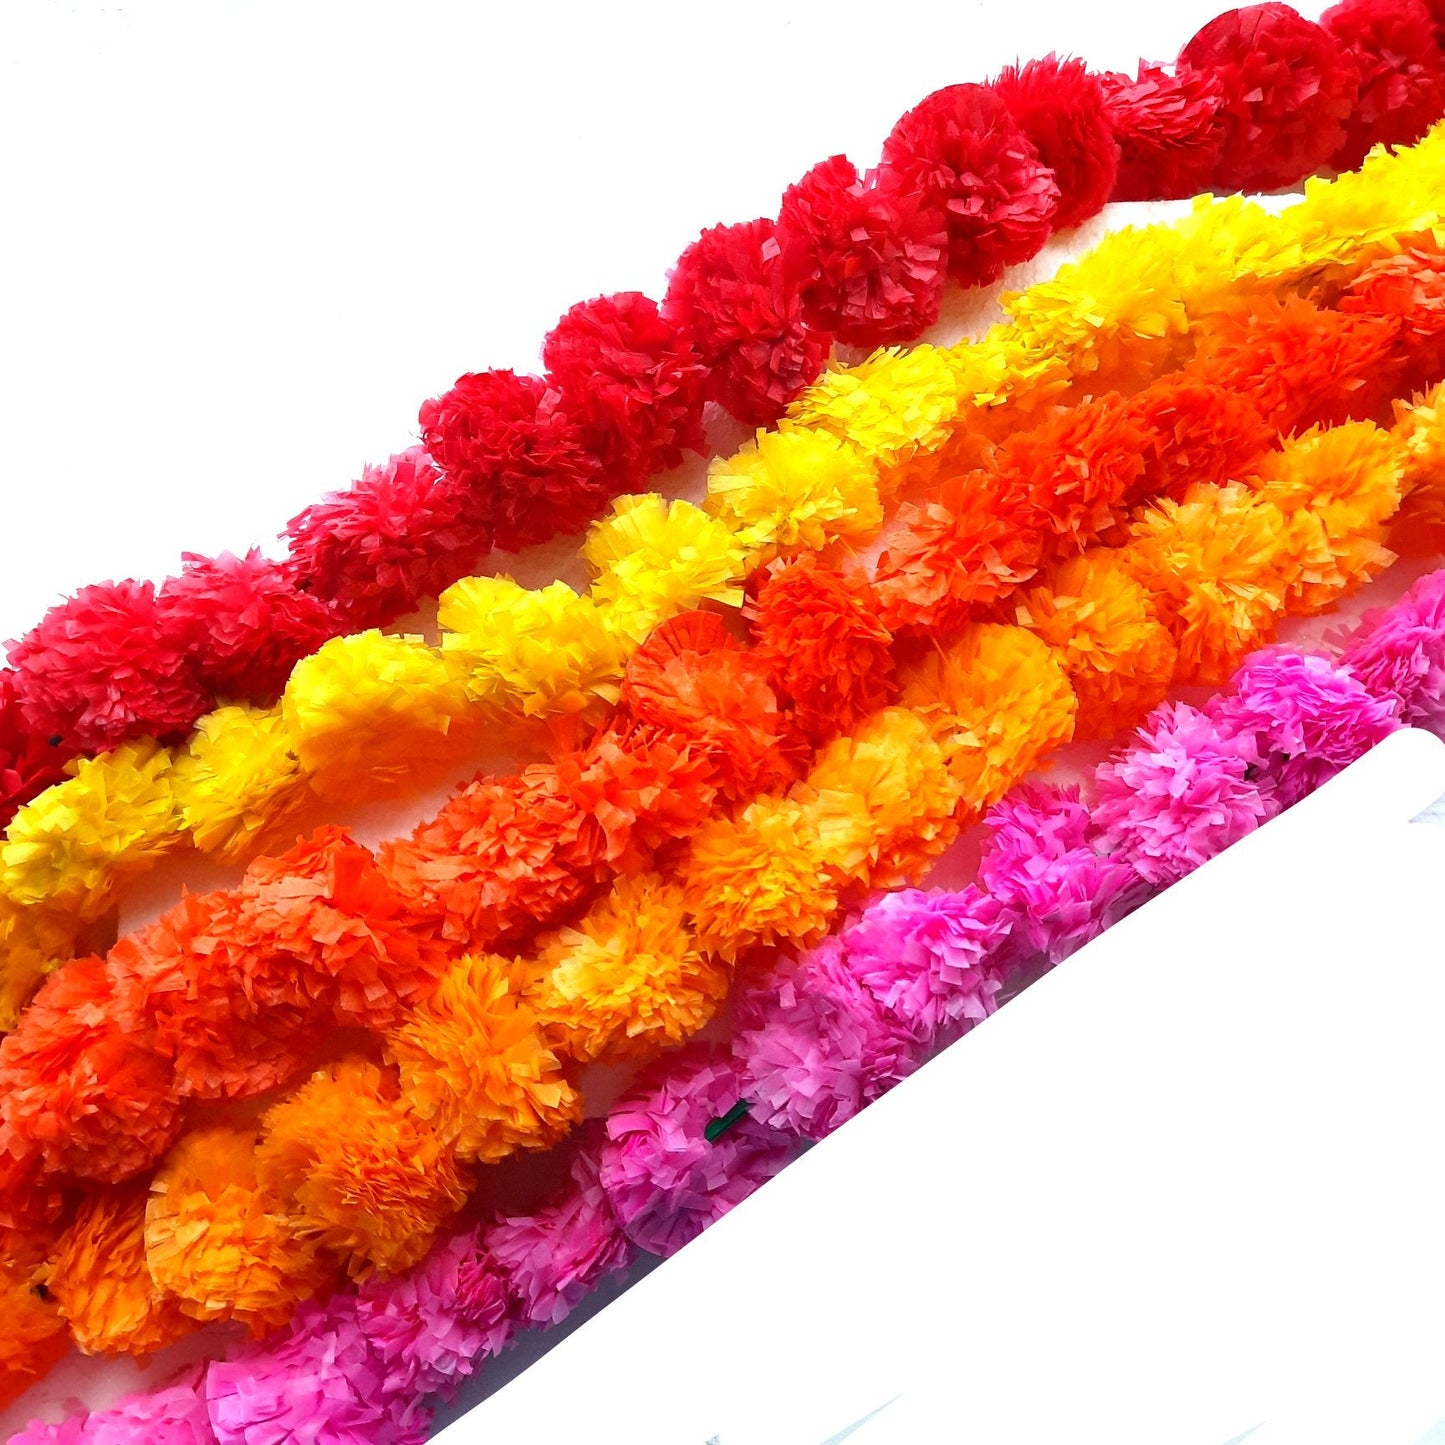 Artificial marigold flower string:  Red